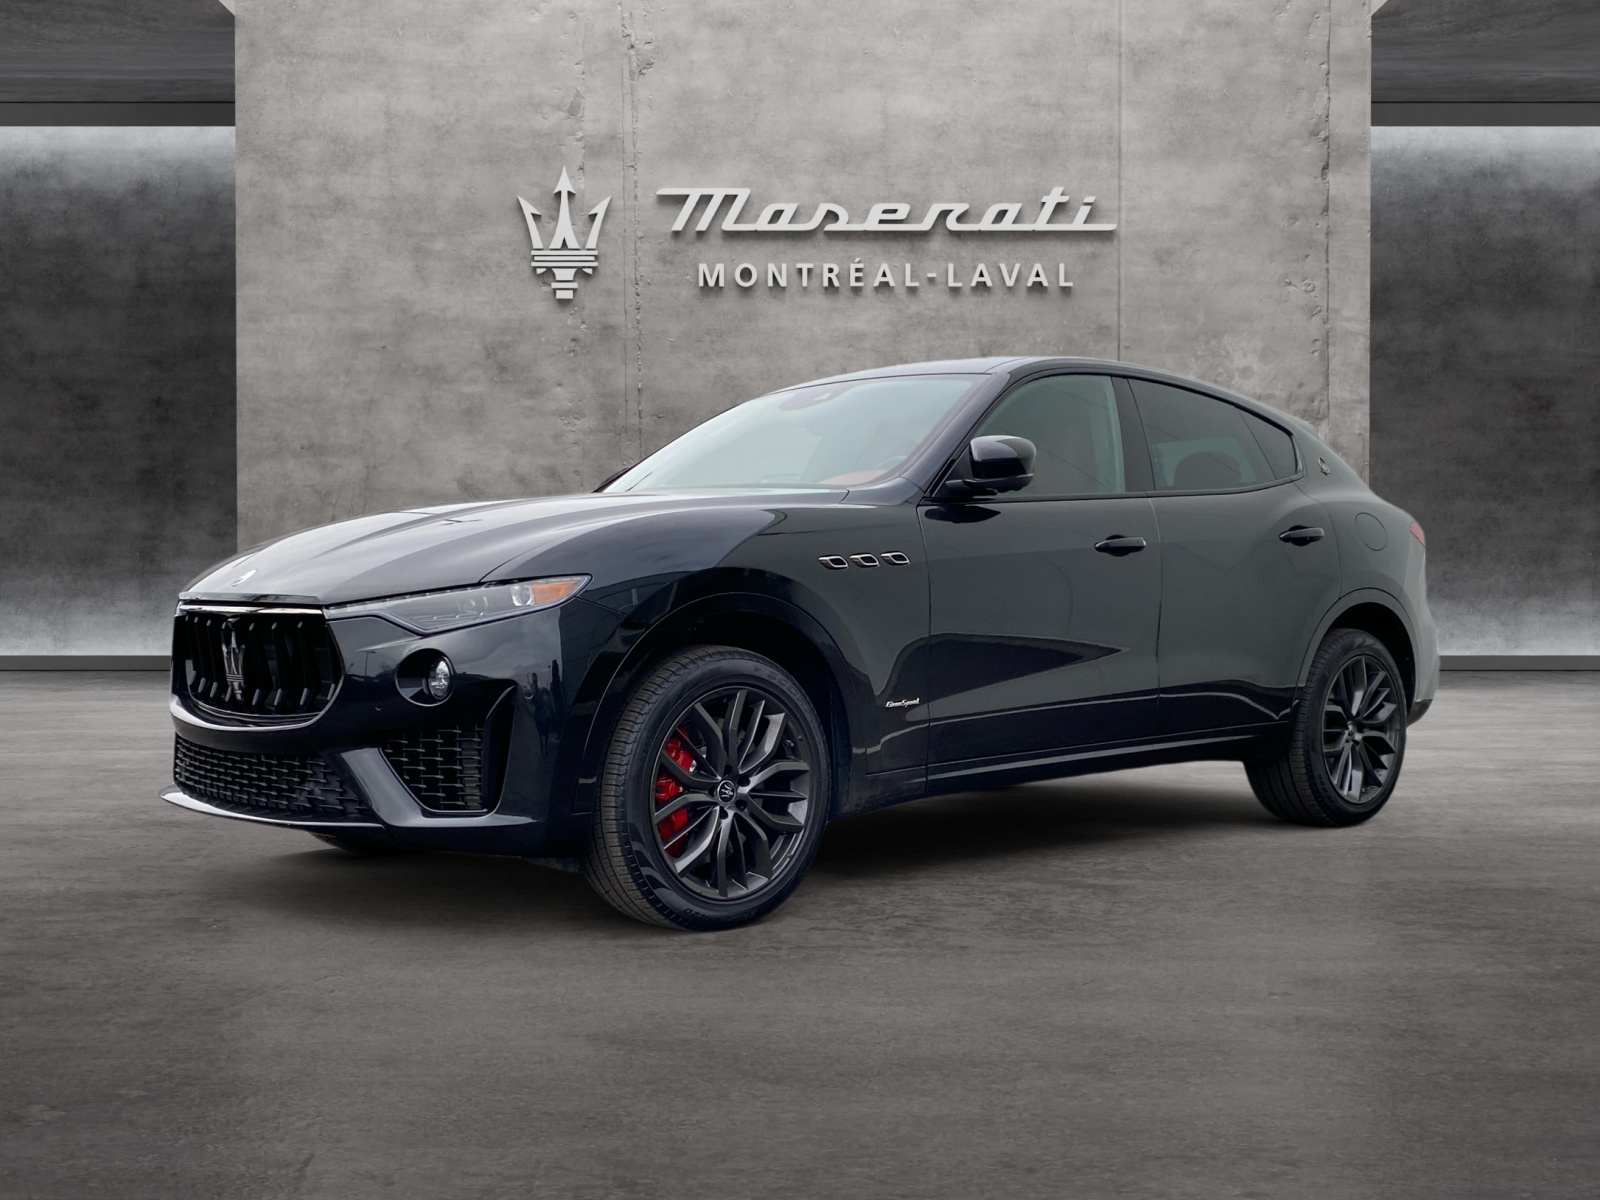 2020 Maserati Levante 1449$ plus applicable taxes 36 months Lease